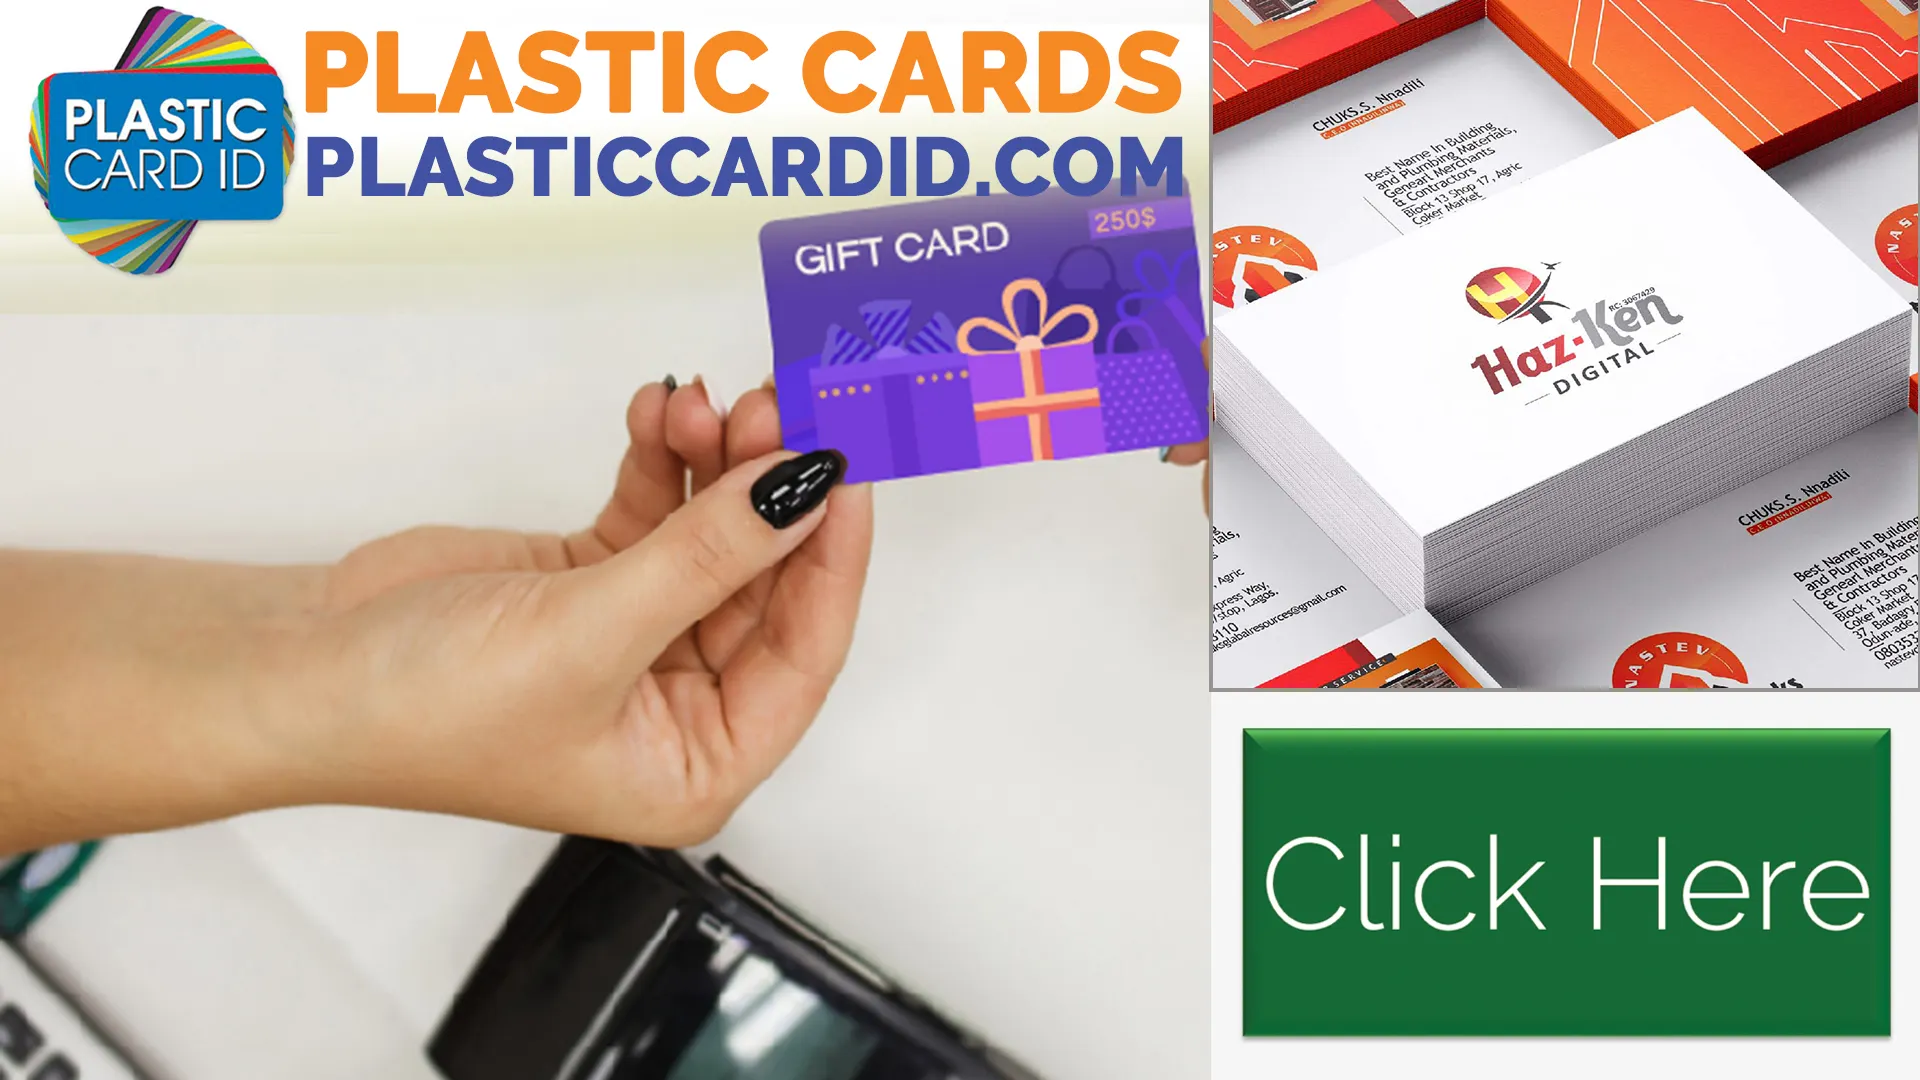 Types of Cards and Accessories: A World of Options at Your Fingertips